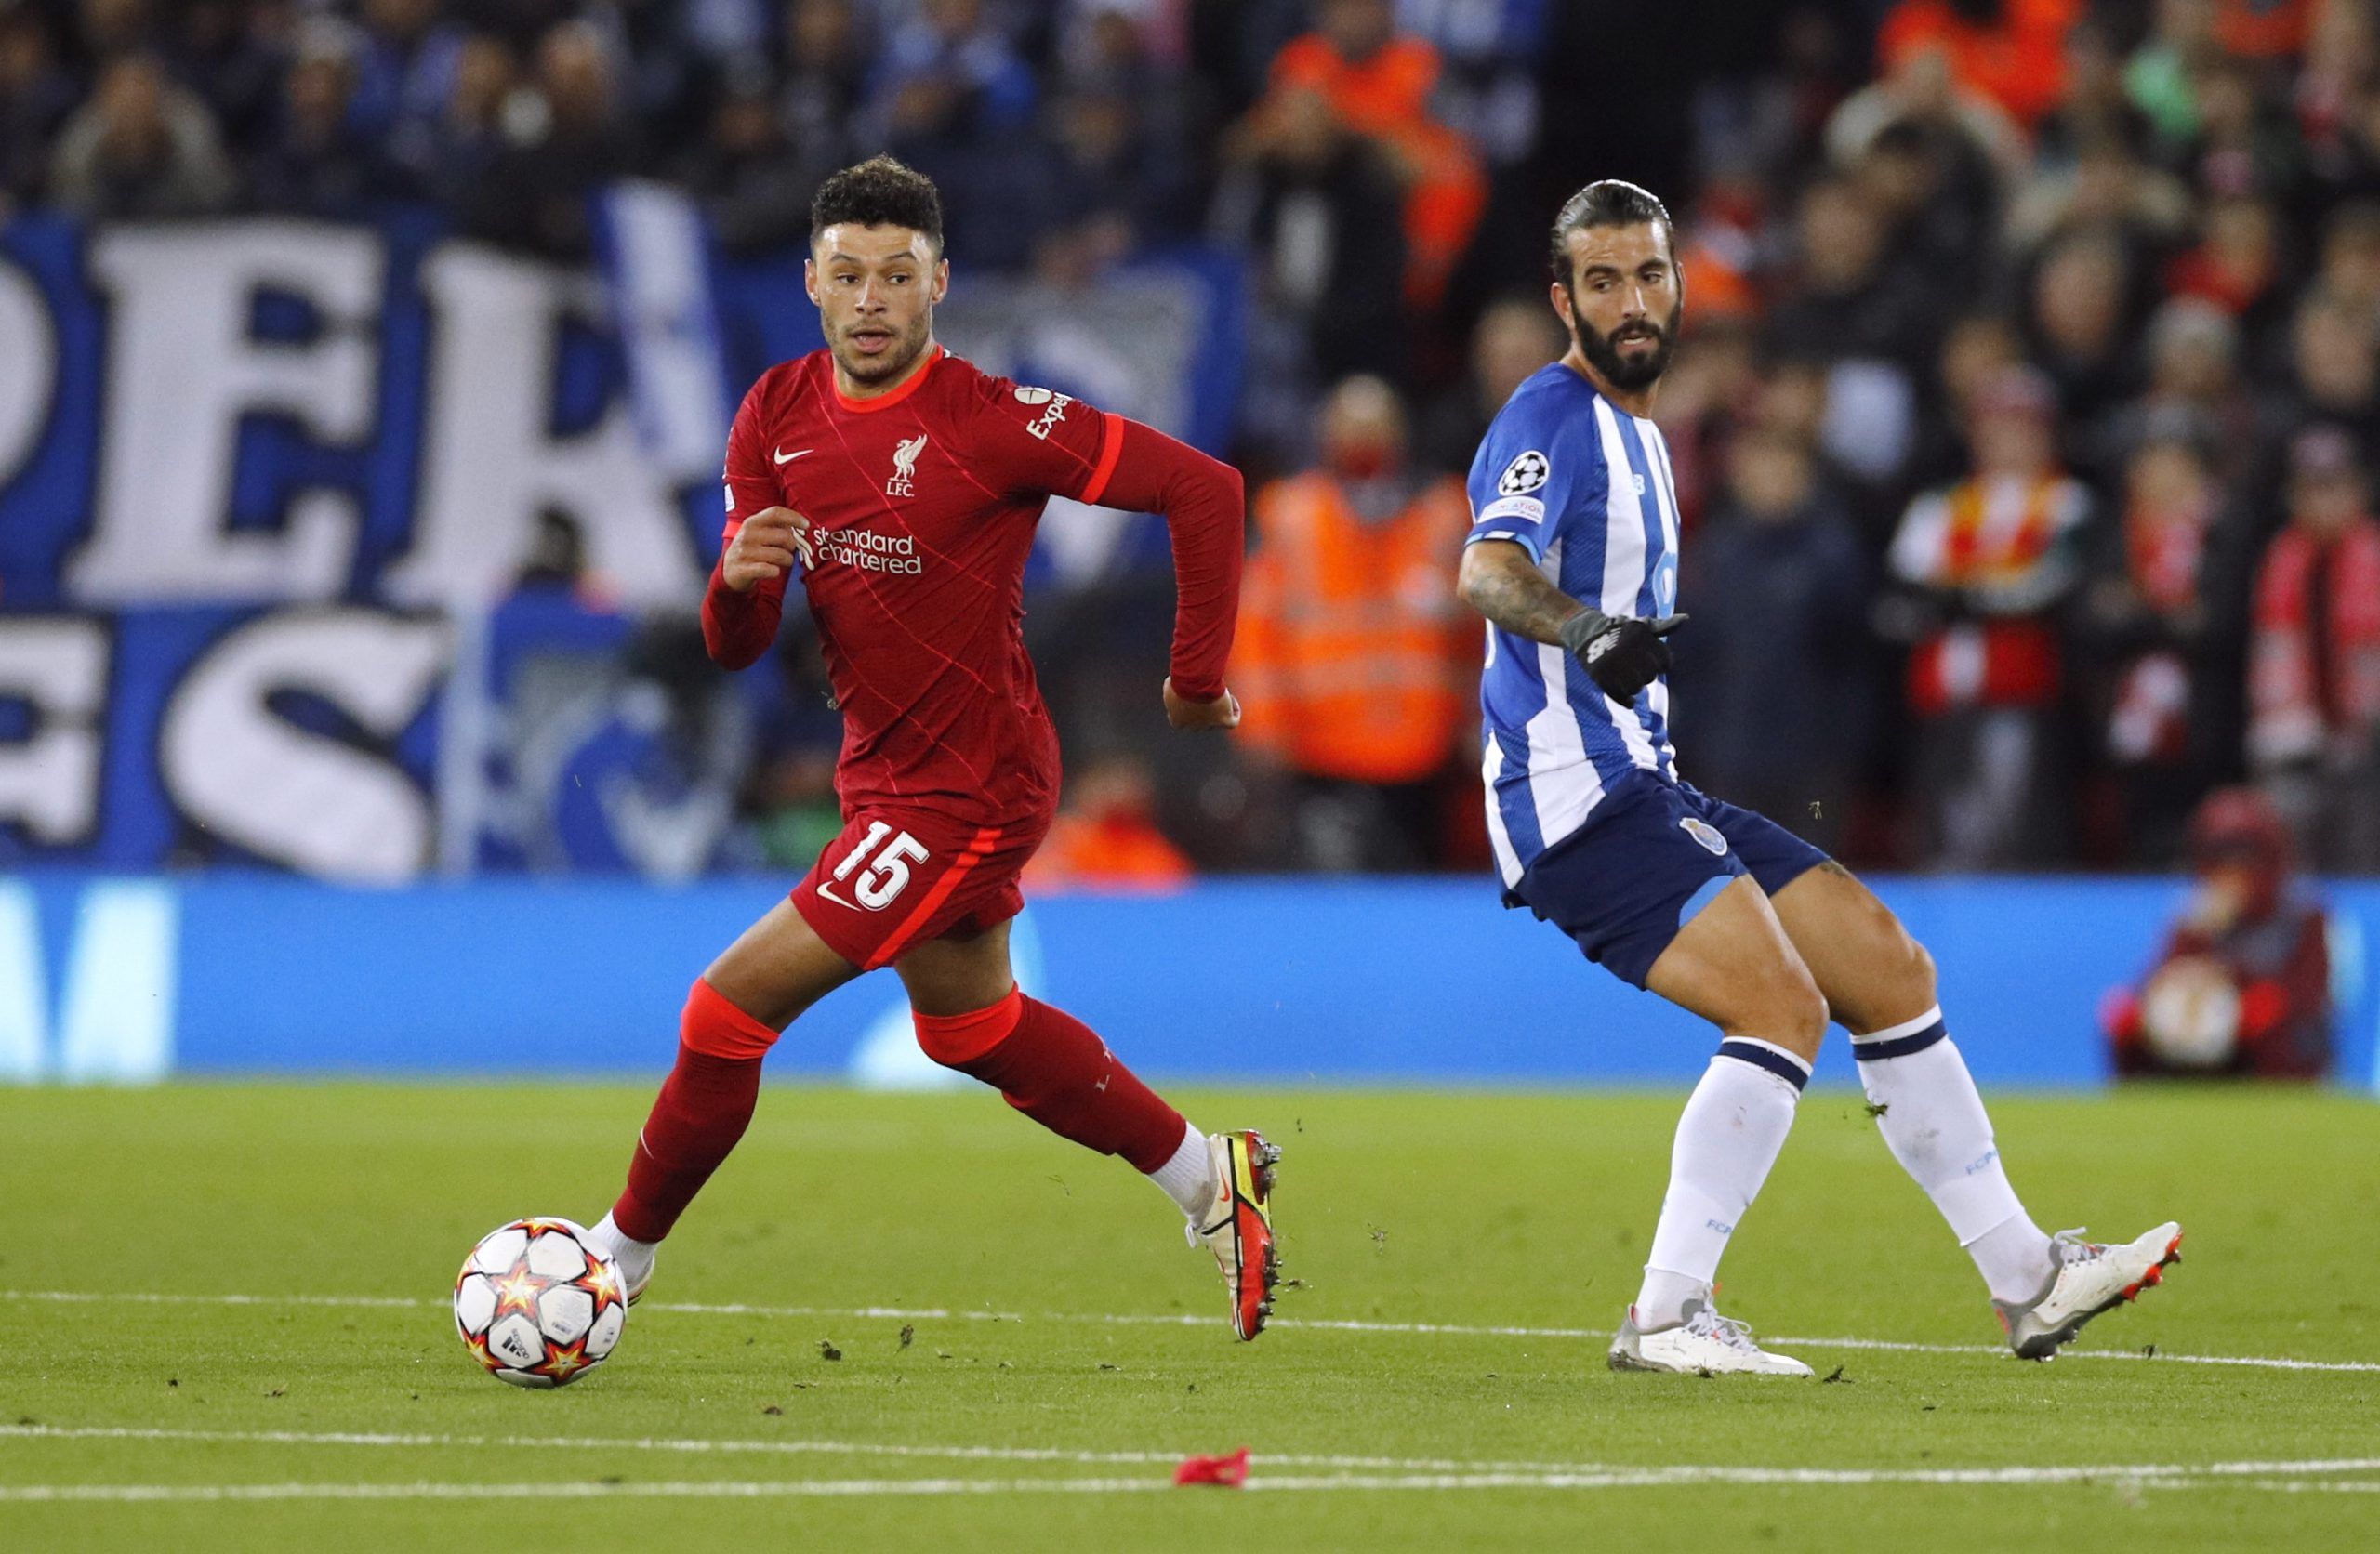 Soccer Football - Champions League - Group B - Liverpool v FC Porto - Anfield, Liverpool, Britain - November 24, 2021 Liverpool's Alex Oxlade-Chamberlain in action with FC Porto's Sergio Oliveira REUTERS/Phil Noble